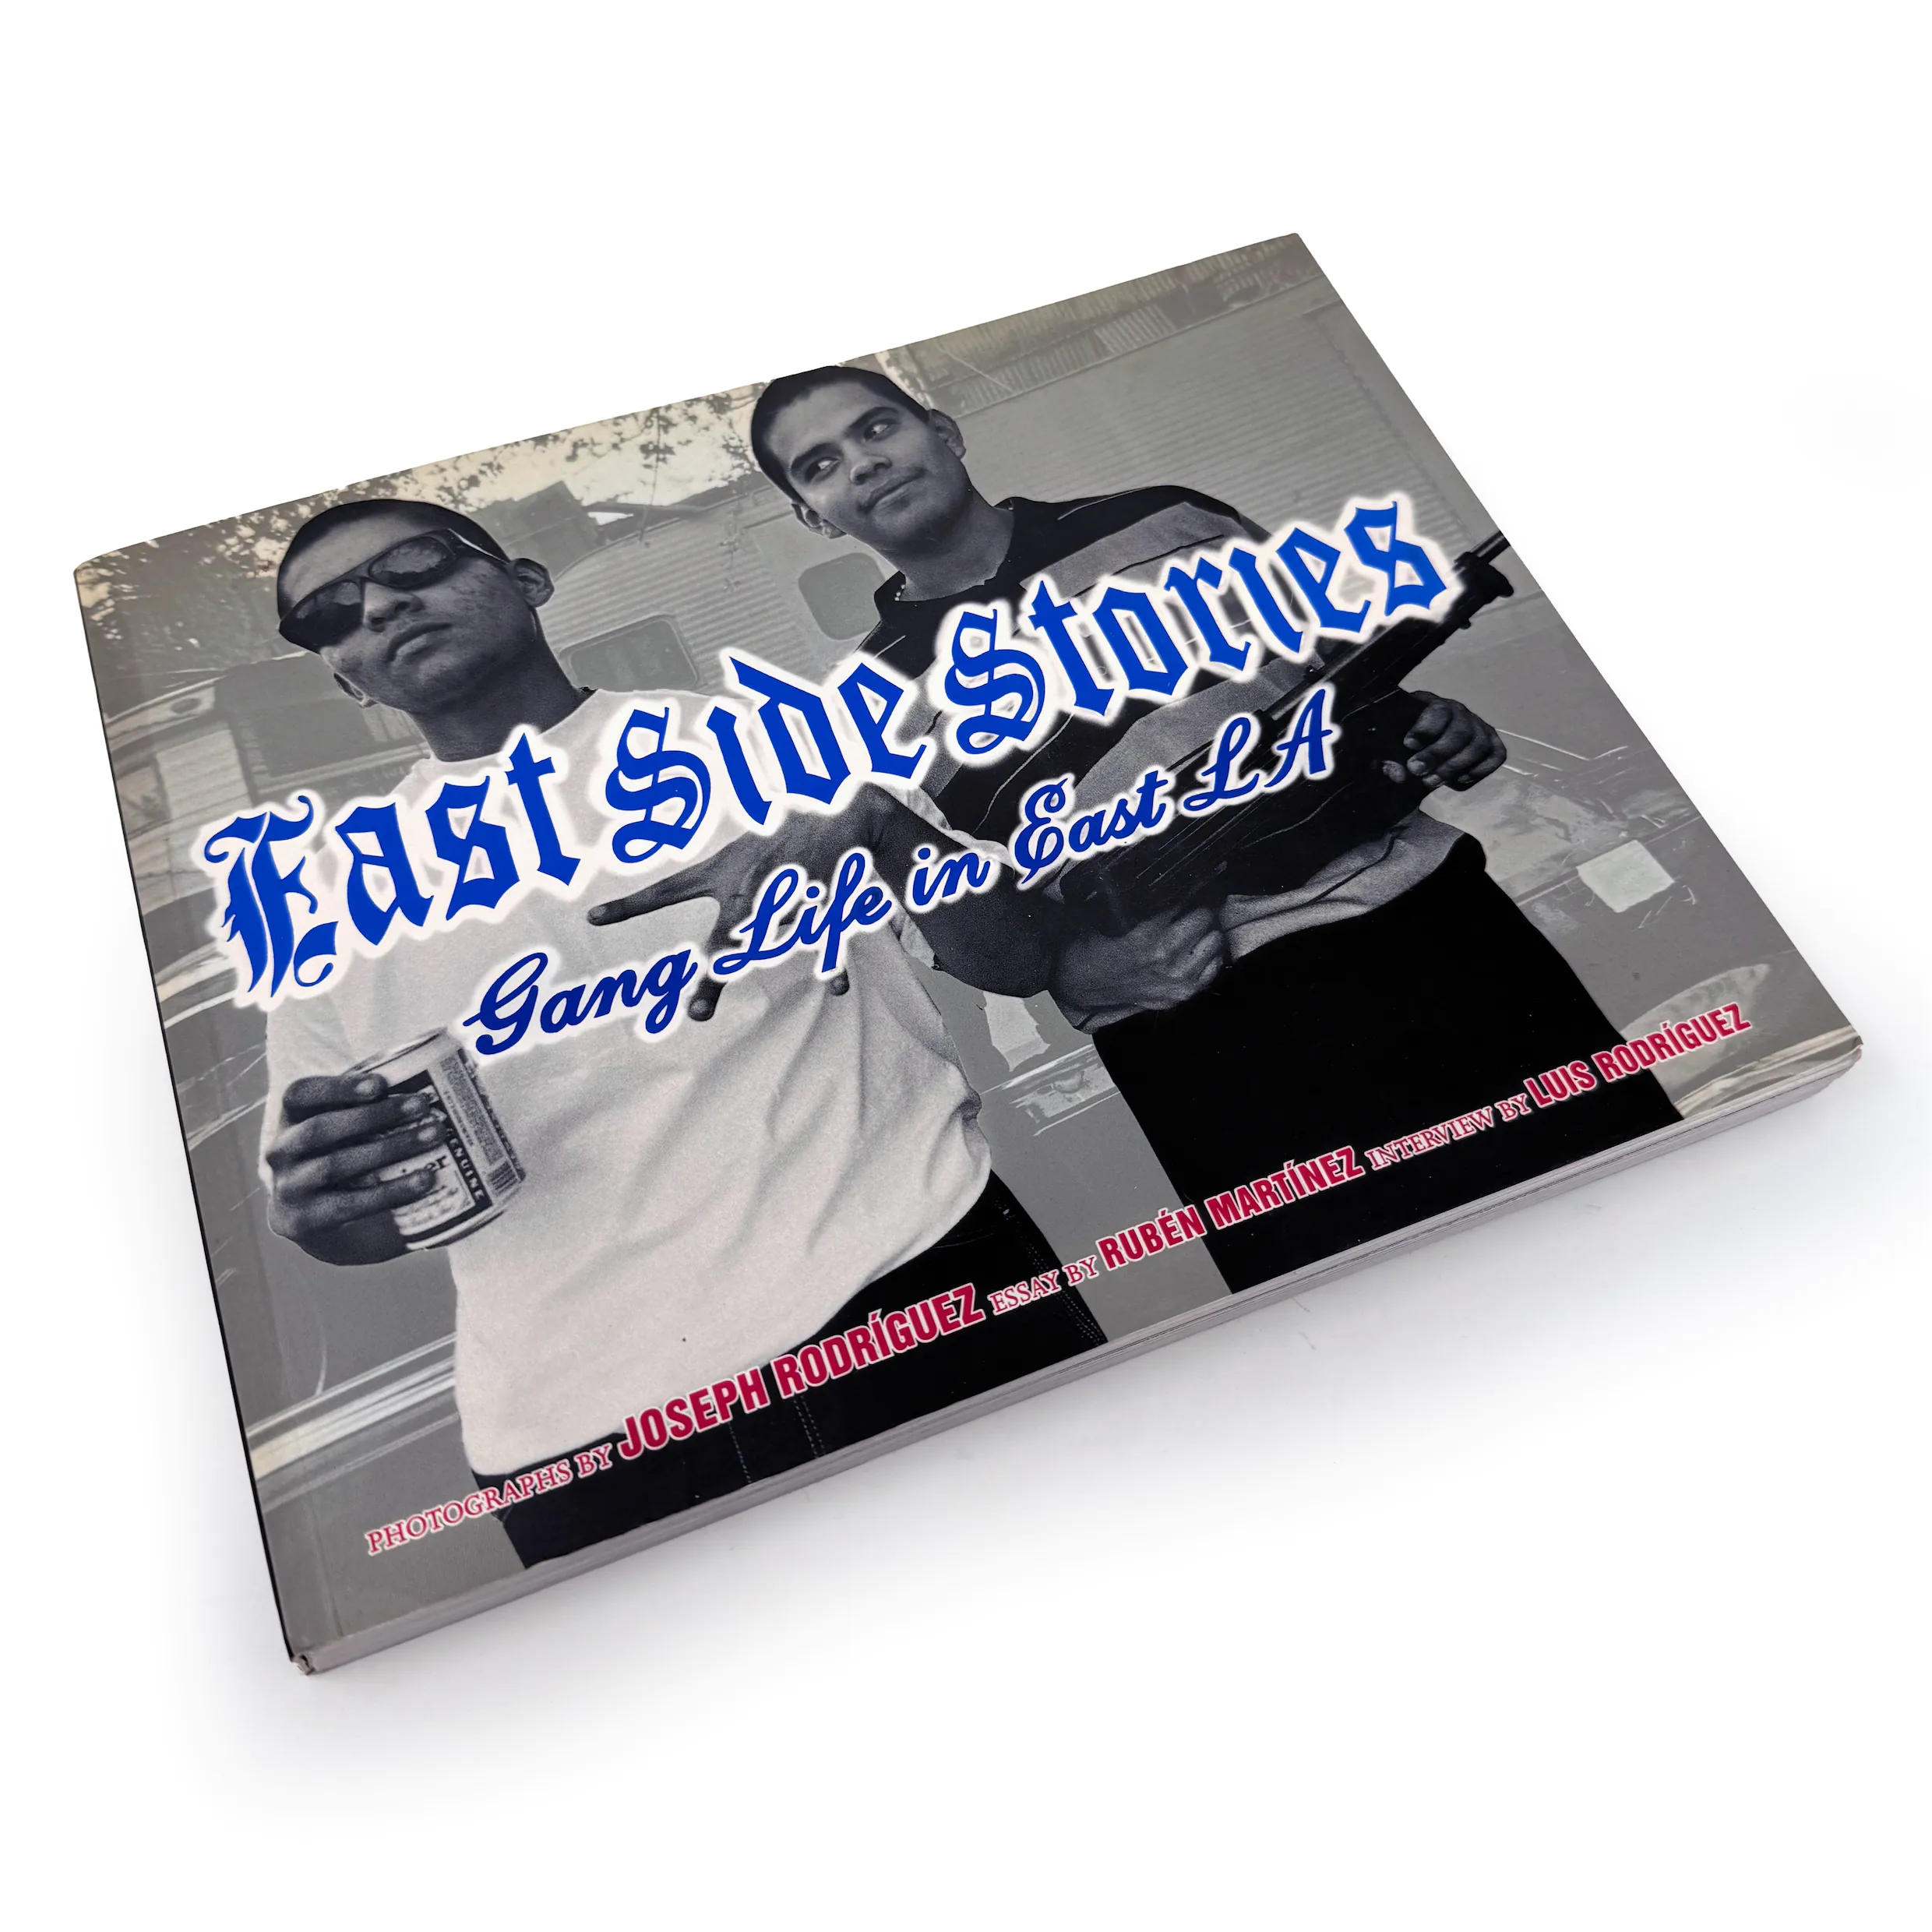 East Side Stories – Gang life in East L.A. (2000)